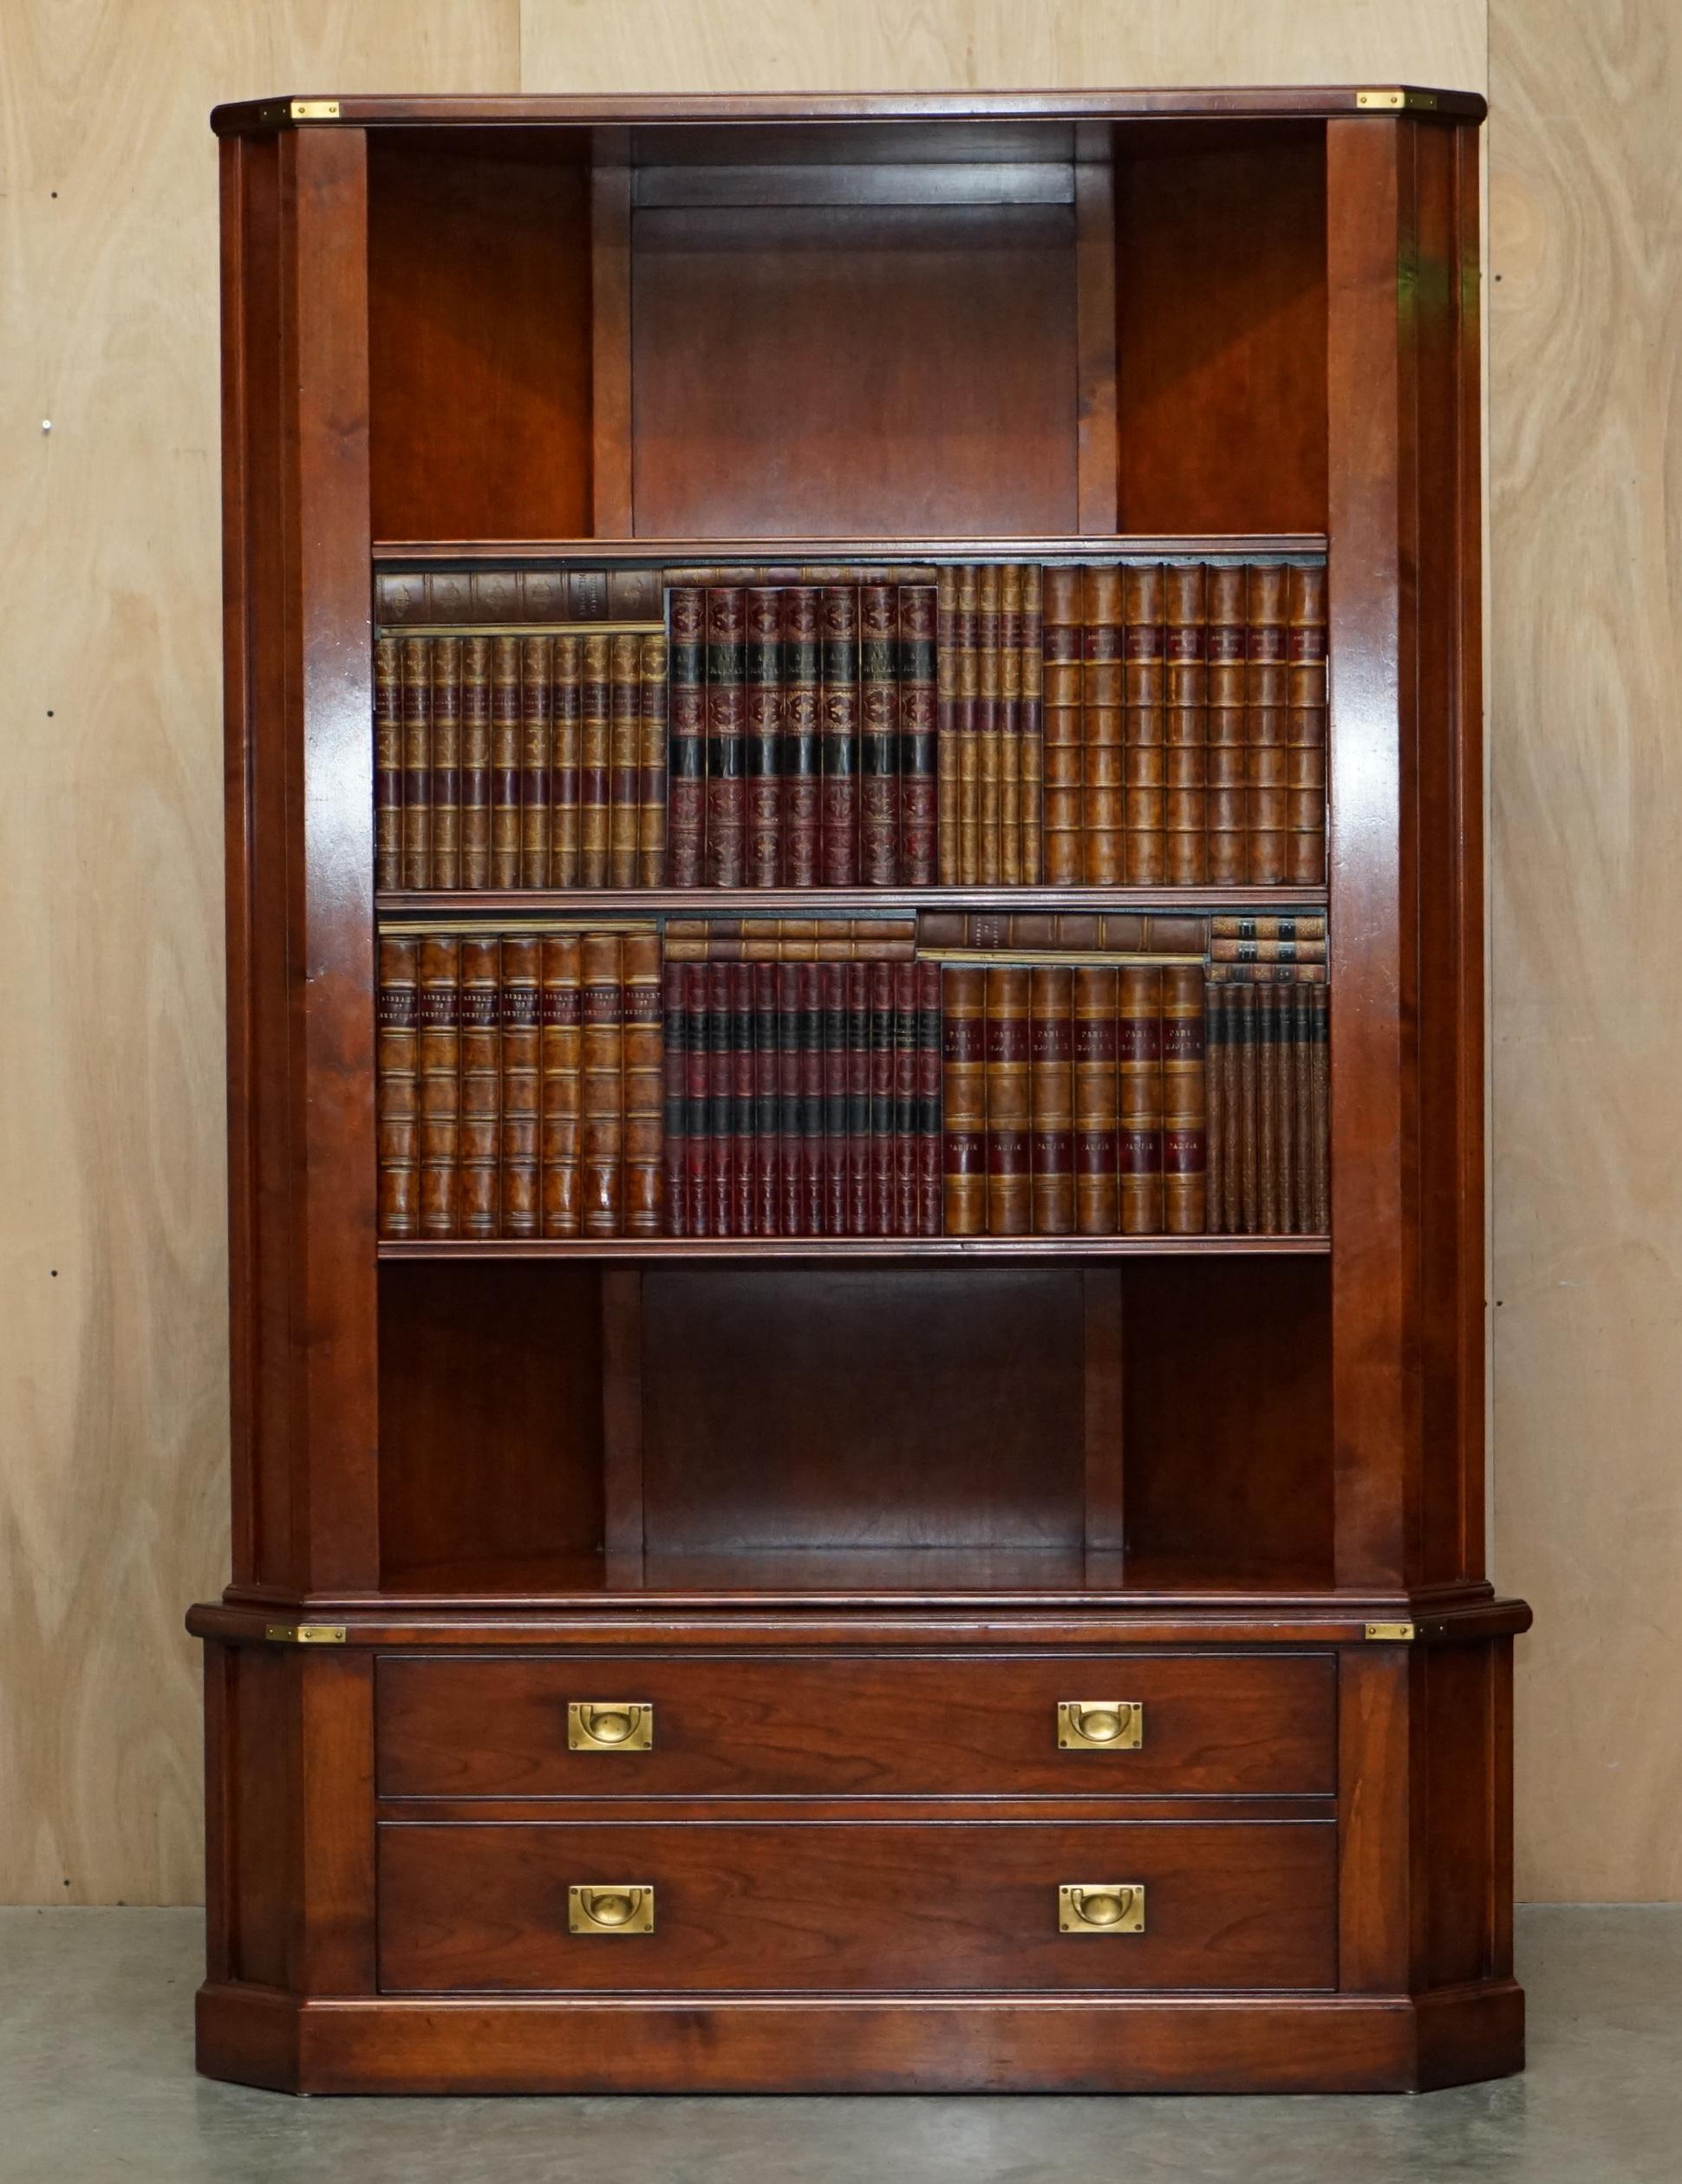 We are delighted to offer for sale 1 of 2 very rare hand made in by Kennedy Furniture and retailed through Harrods London solid mahogany Bookcase TV media stands with faux book front.

I have as mentioned two of these exactly the same, this sale